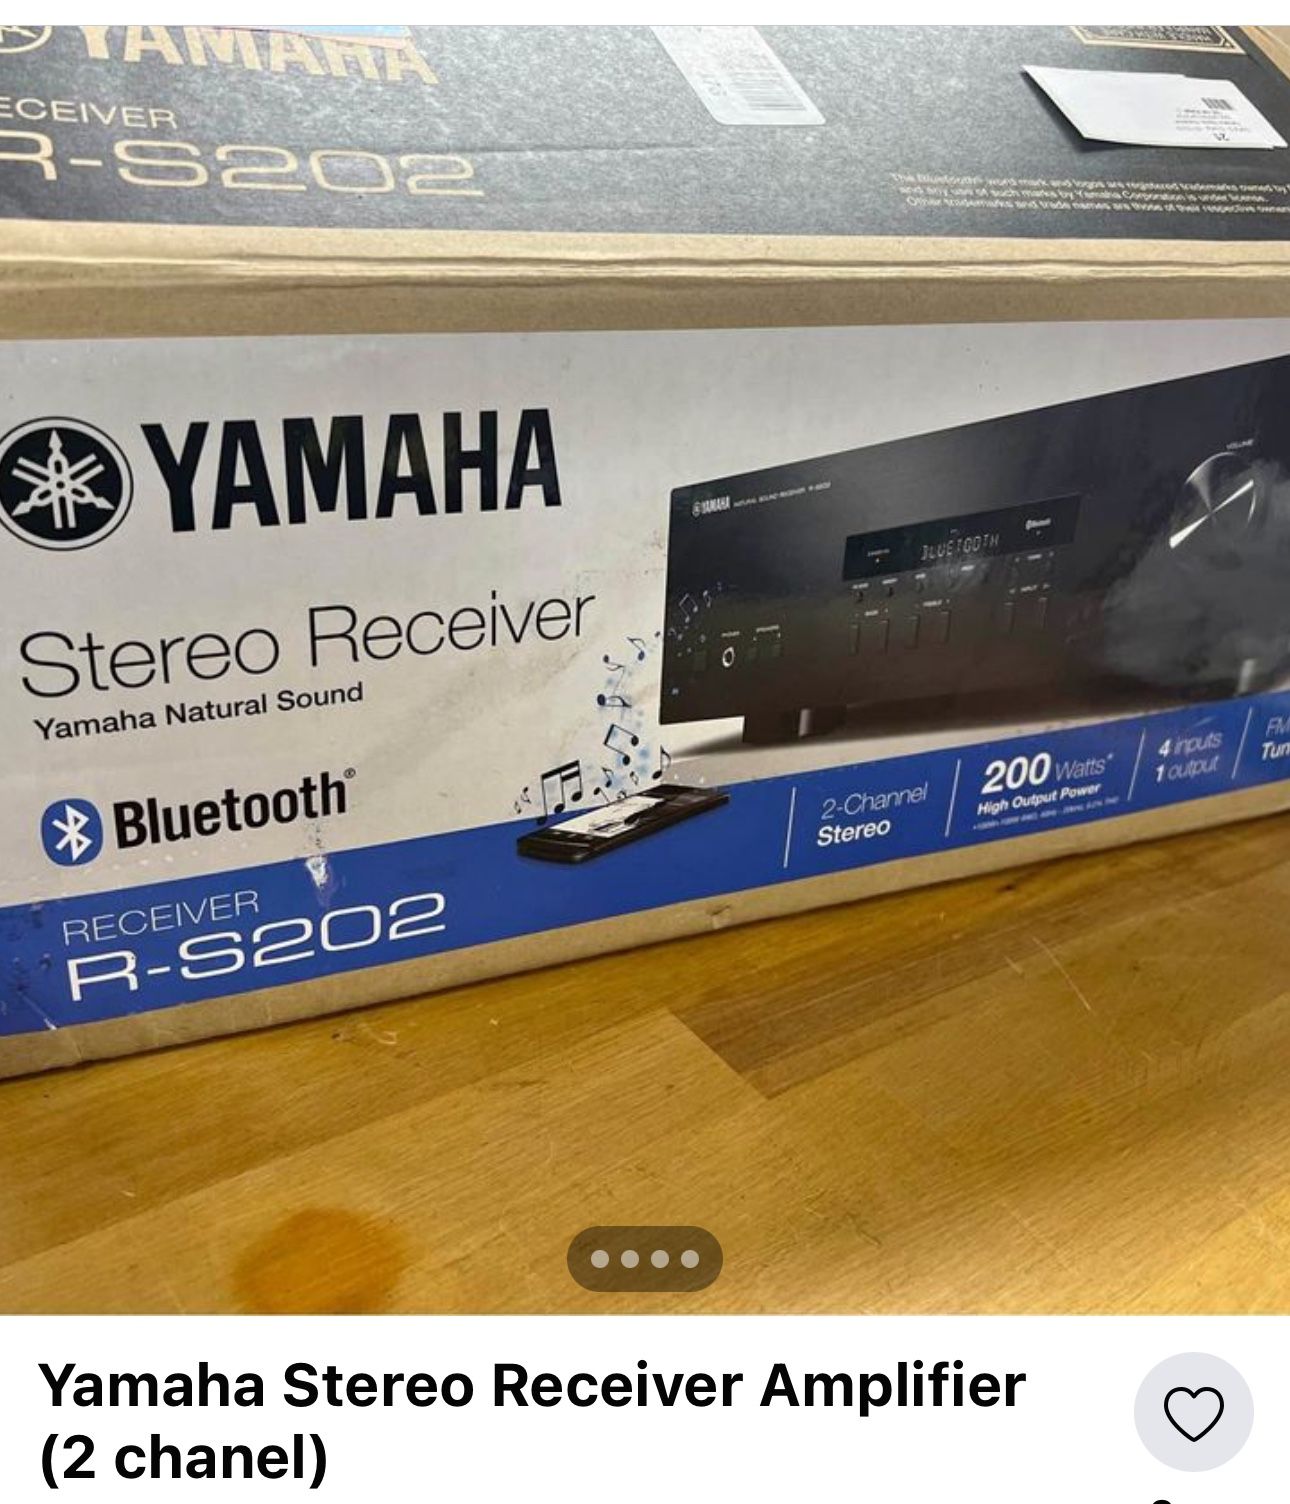 AHRA ECEIVER R-S202 YAMAHA Stereo Receiver Yamaha Natural Sound * Bluetooth® RECEIVER R-S202 MUẾT COIM 4 nuts 1 cupul FN Tun 2-Channel Stereo 200 Watt